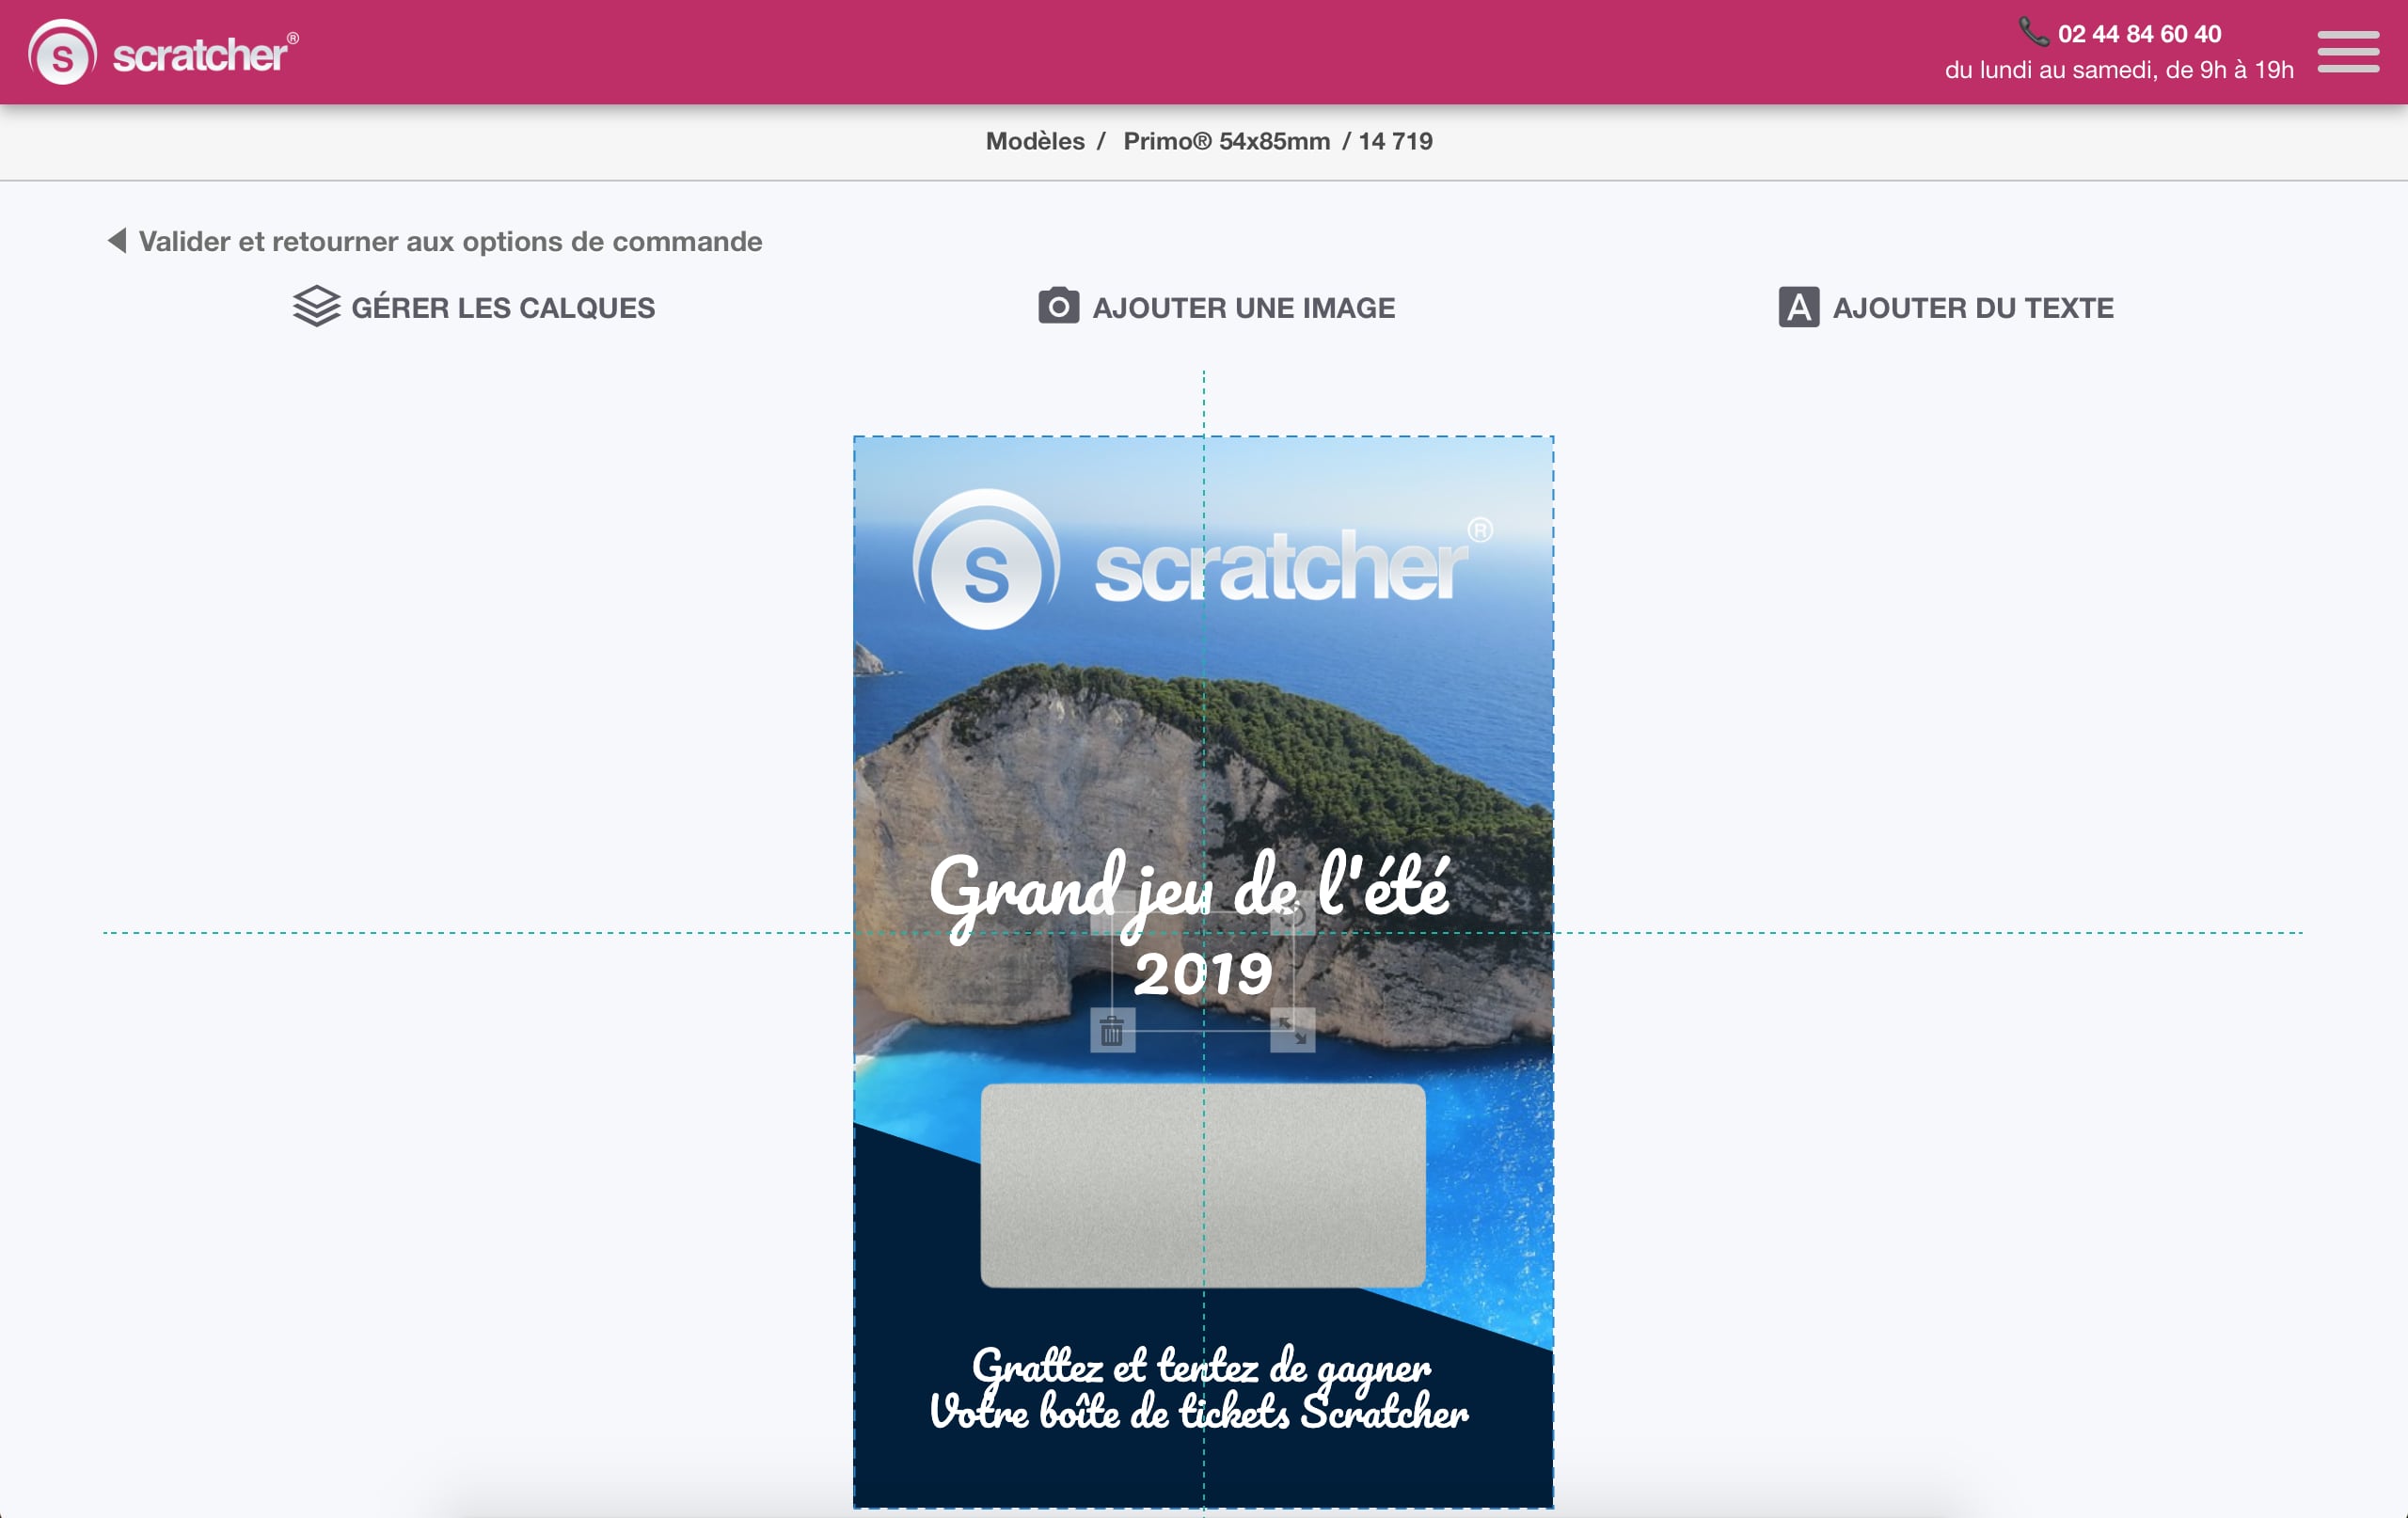 Design your scratch cards online in a few clicks using the configurator at www.scratcher.fr